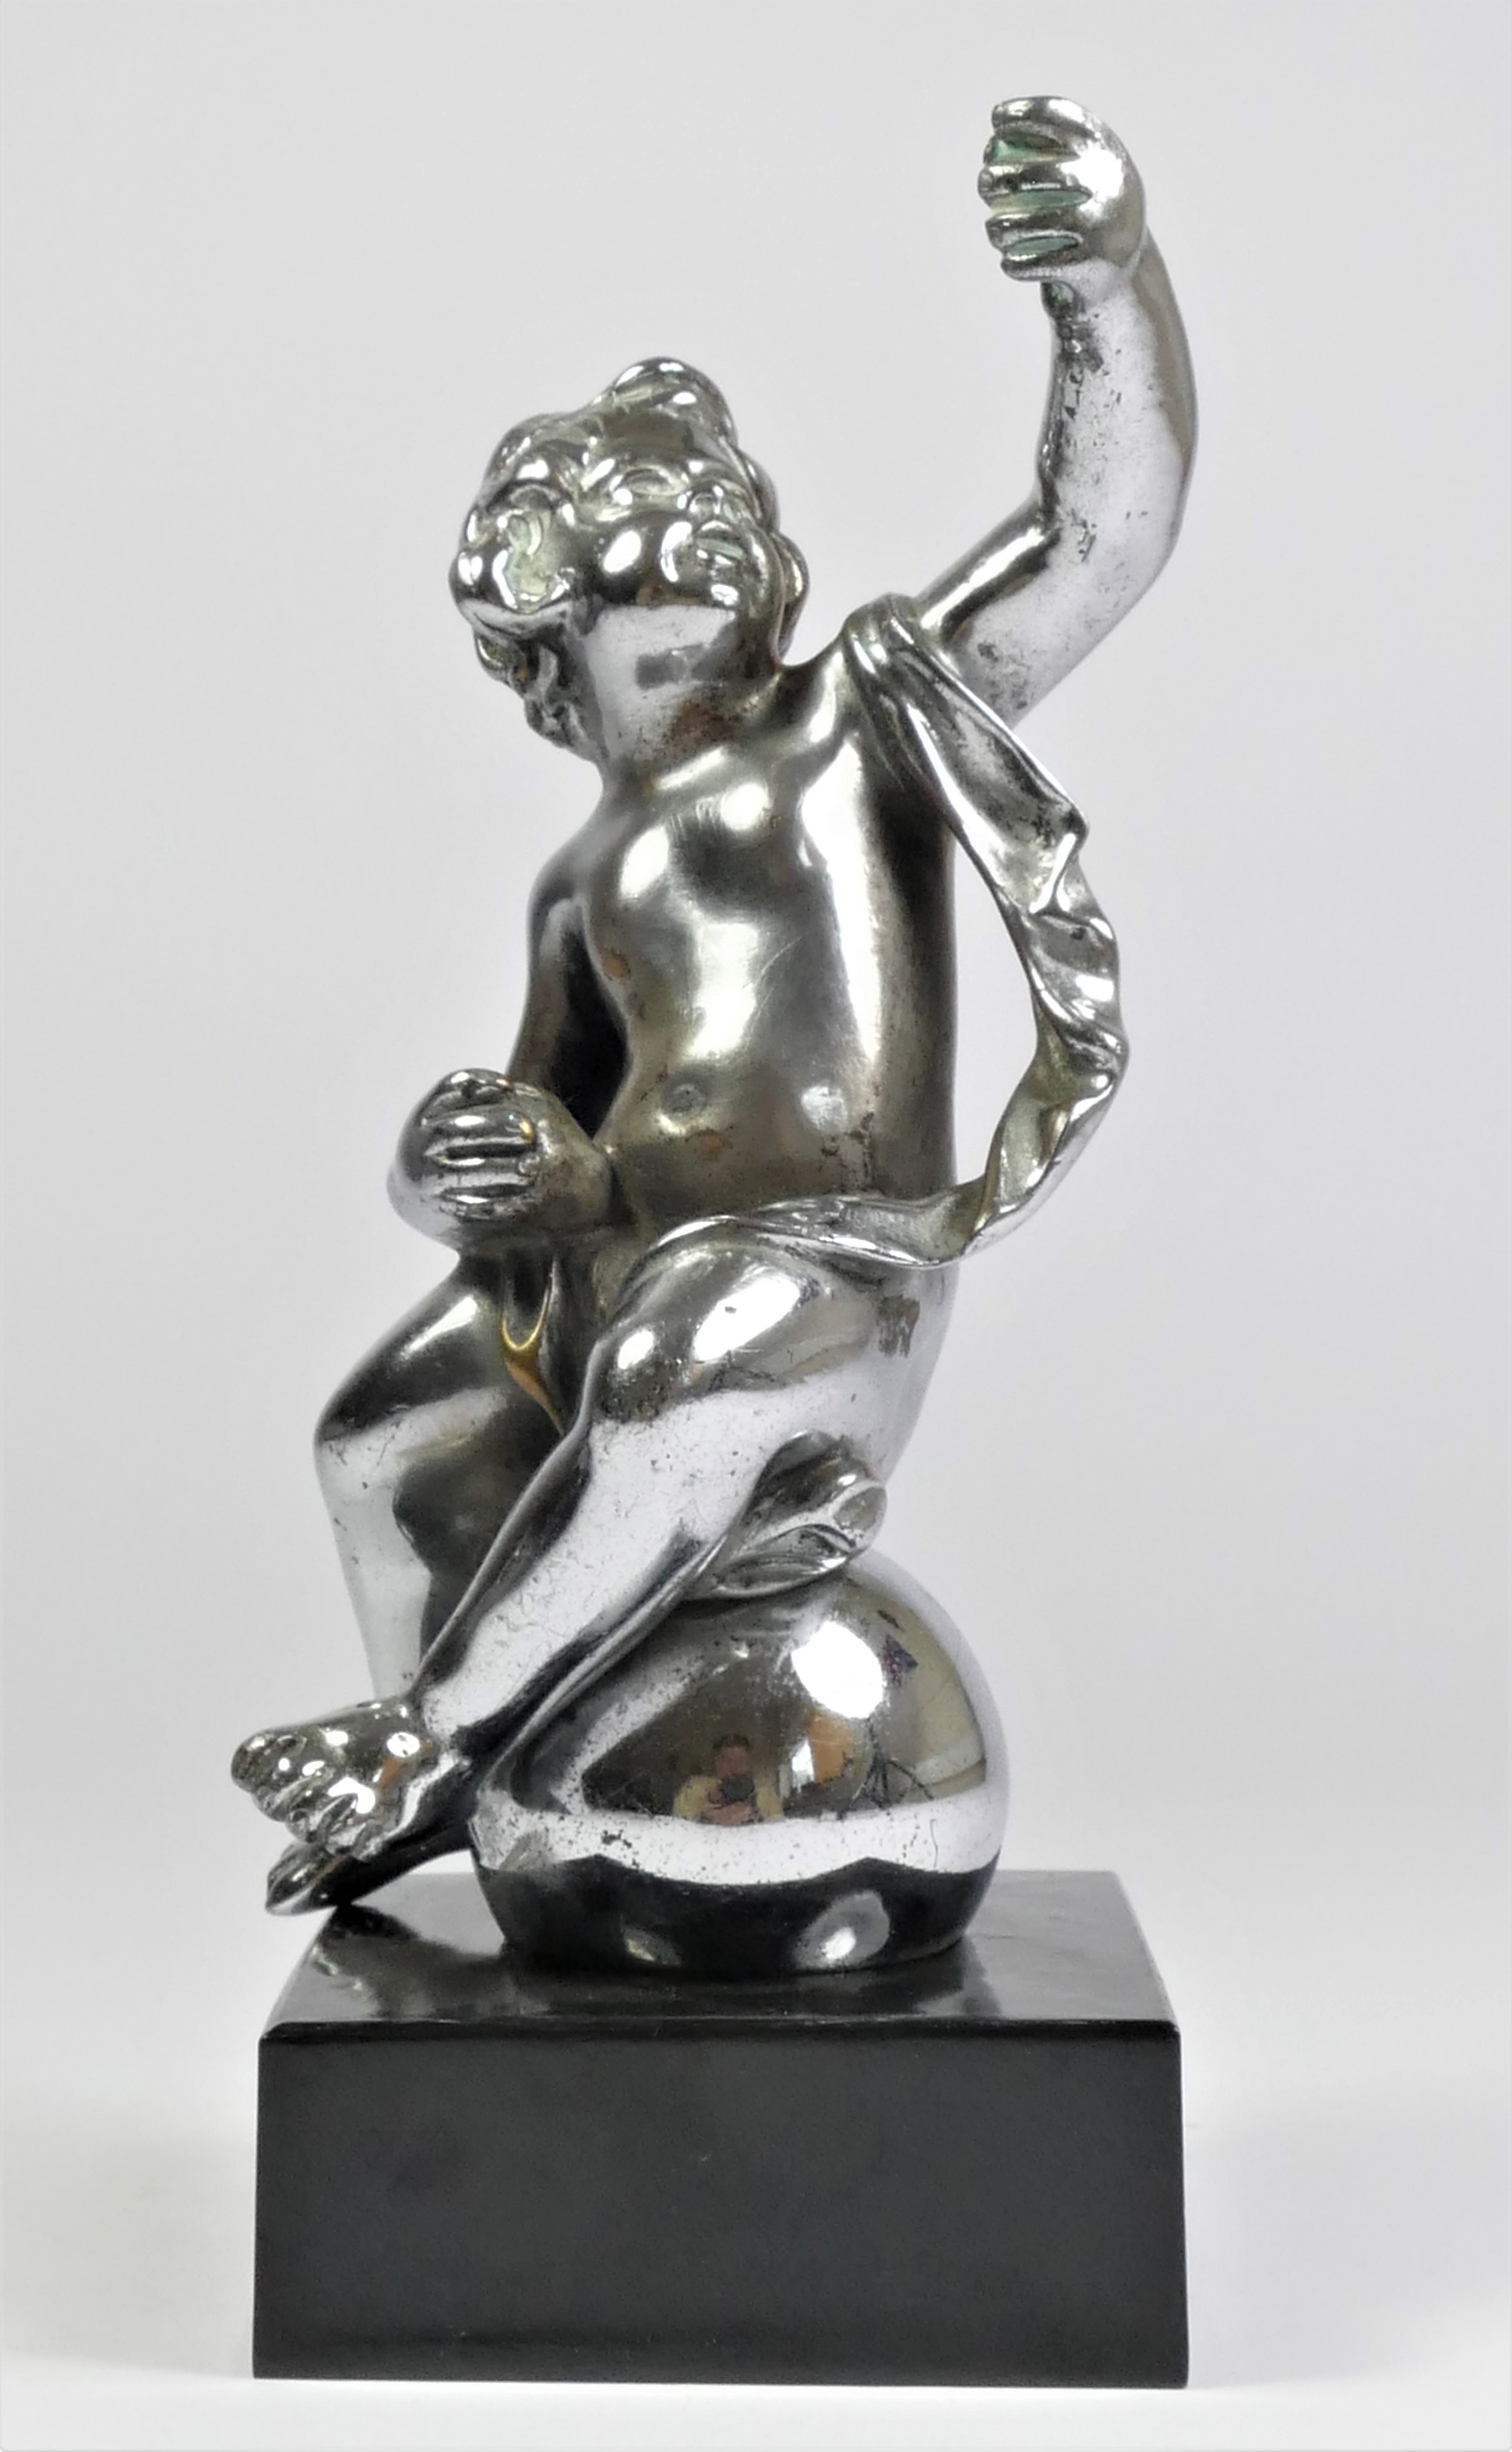 A chrome car mascot in the form of a cherub seated on a ball, mounted on a black onyx base, 18cm.